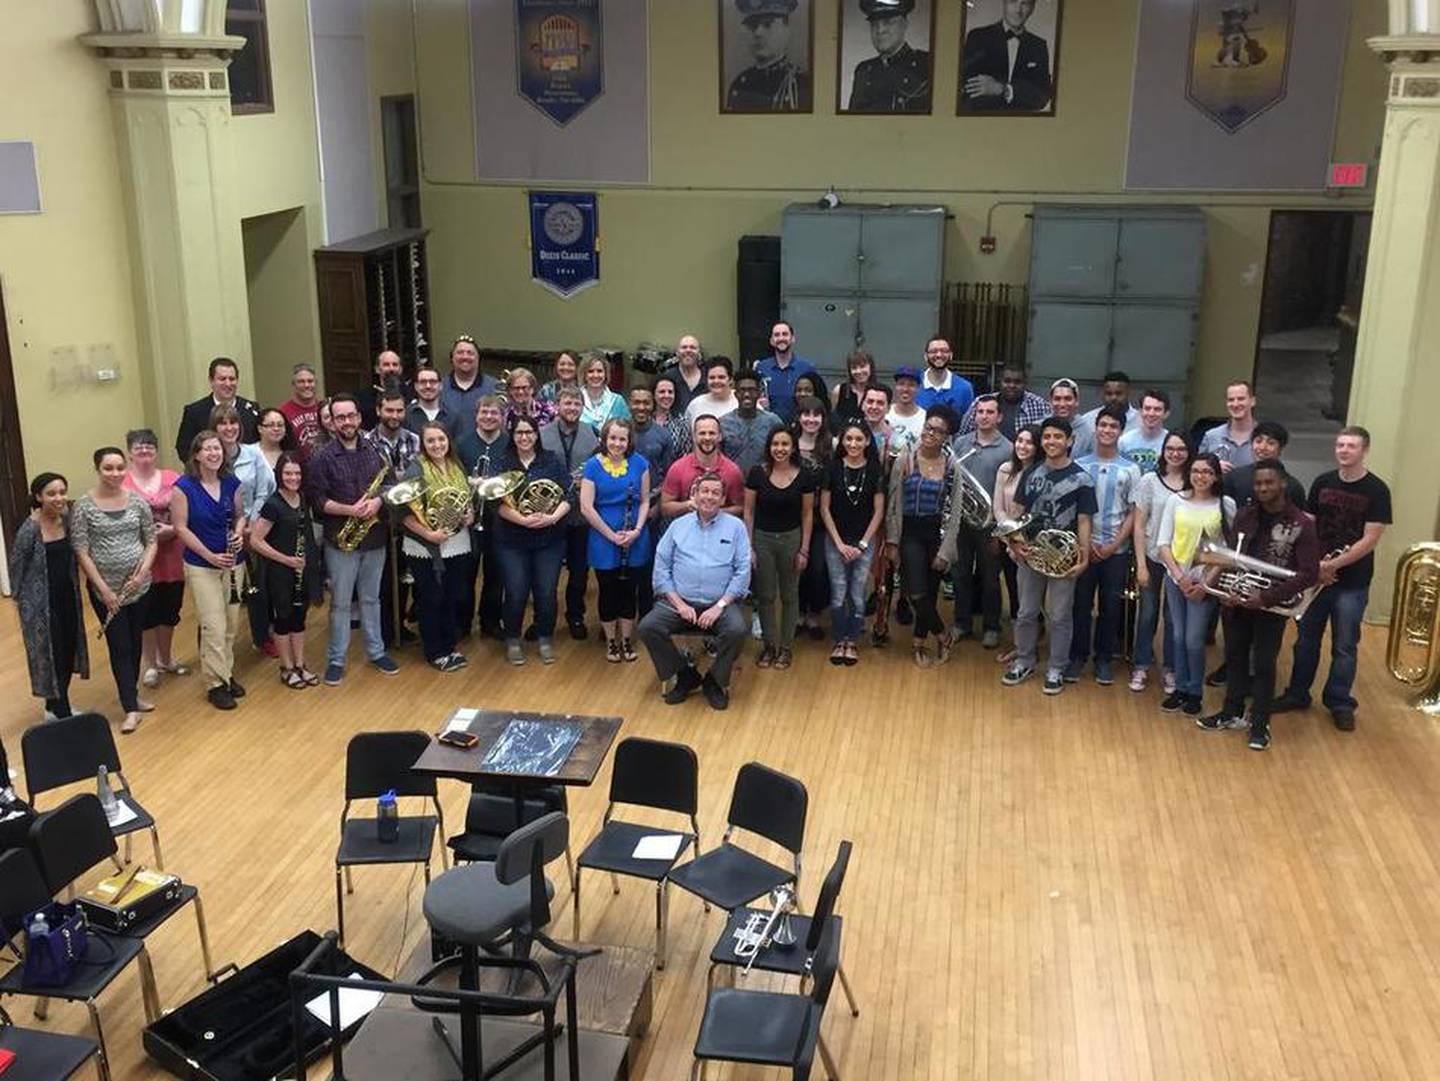 Joliet Central High School Band Director Mike Fiske enjoys a surprise arrival and rehearsal from his former students Saturday before Sunday's farewell concert. Fiske retires after 39 years in music education, most of his years teaching at Morris Community High School and Central.